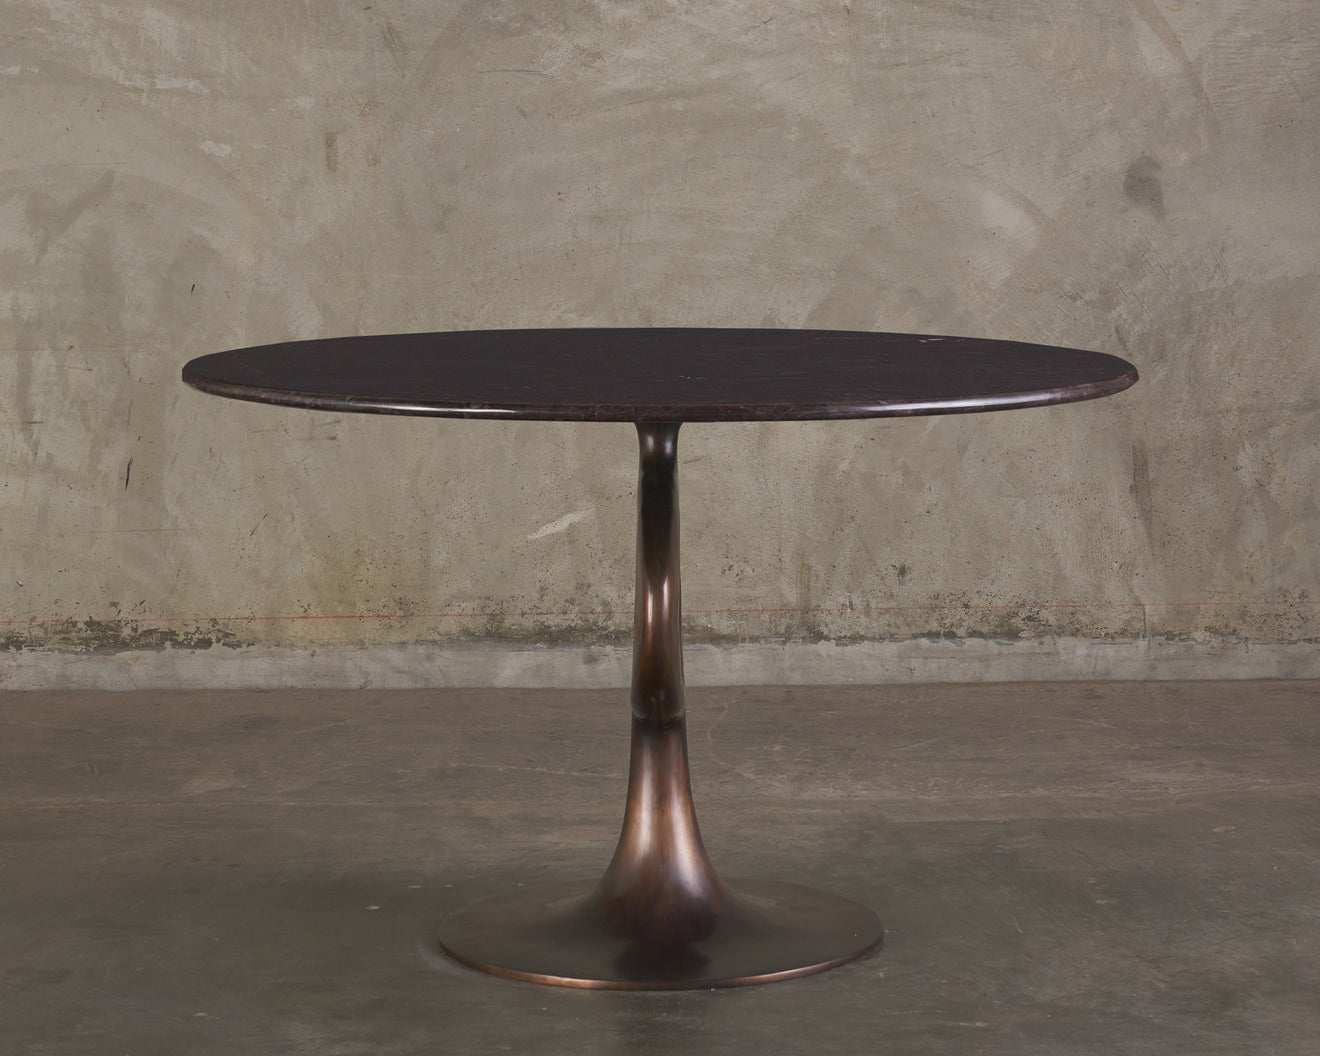 BCW OP ROUND TABLE WITH GRANITE TOP